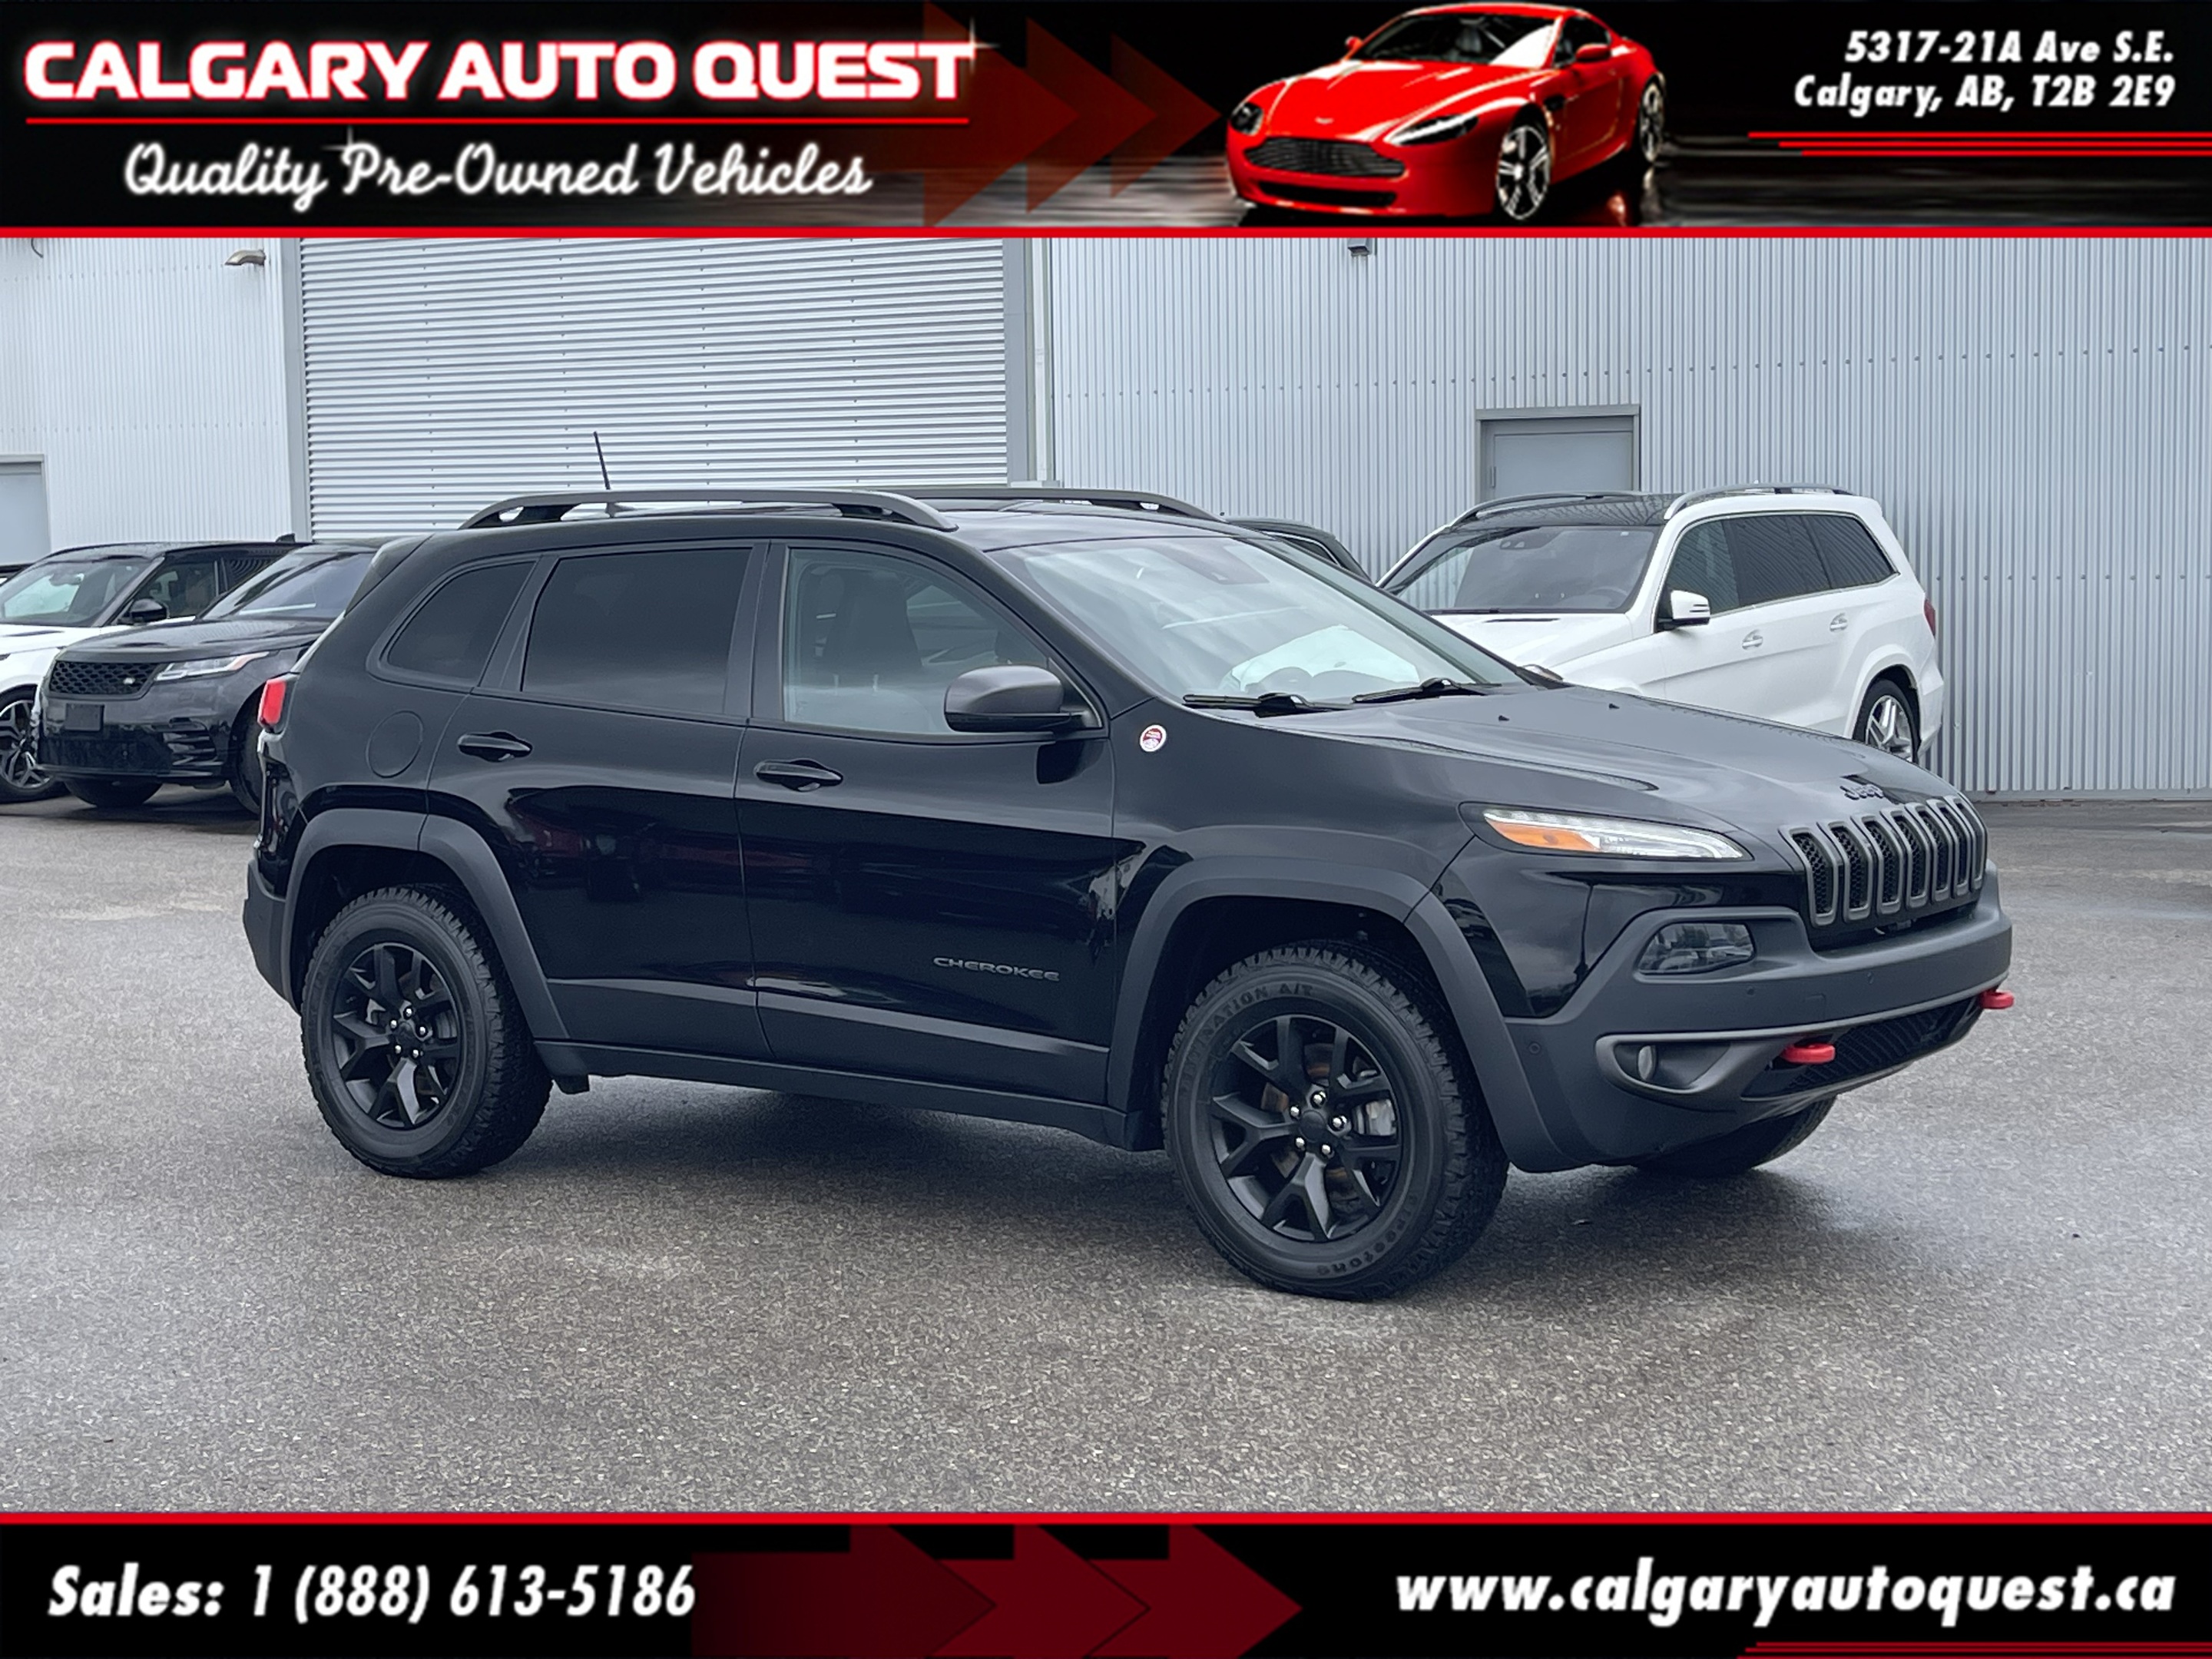 2018 Jeep Cherokee Trailhawk Leather Plus 4x4 NAVI/B.CAM/LEATHER/ROOF